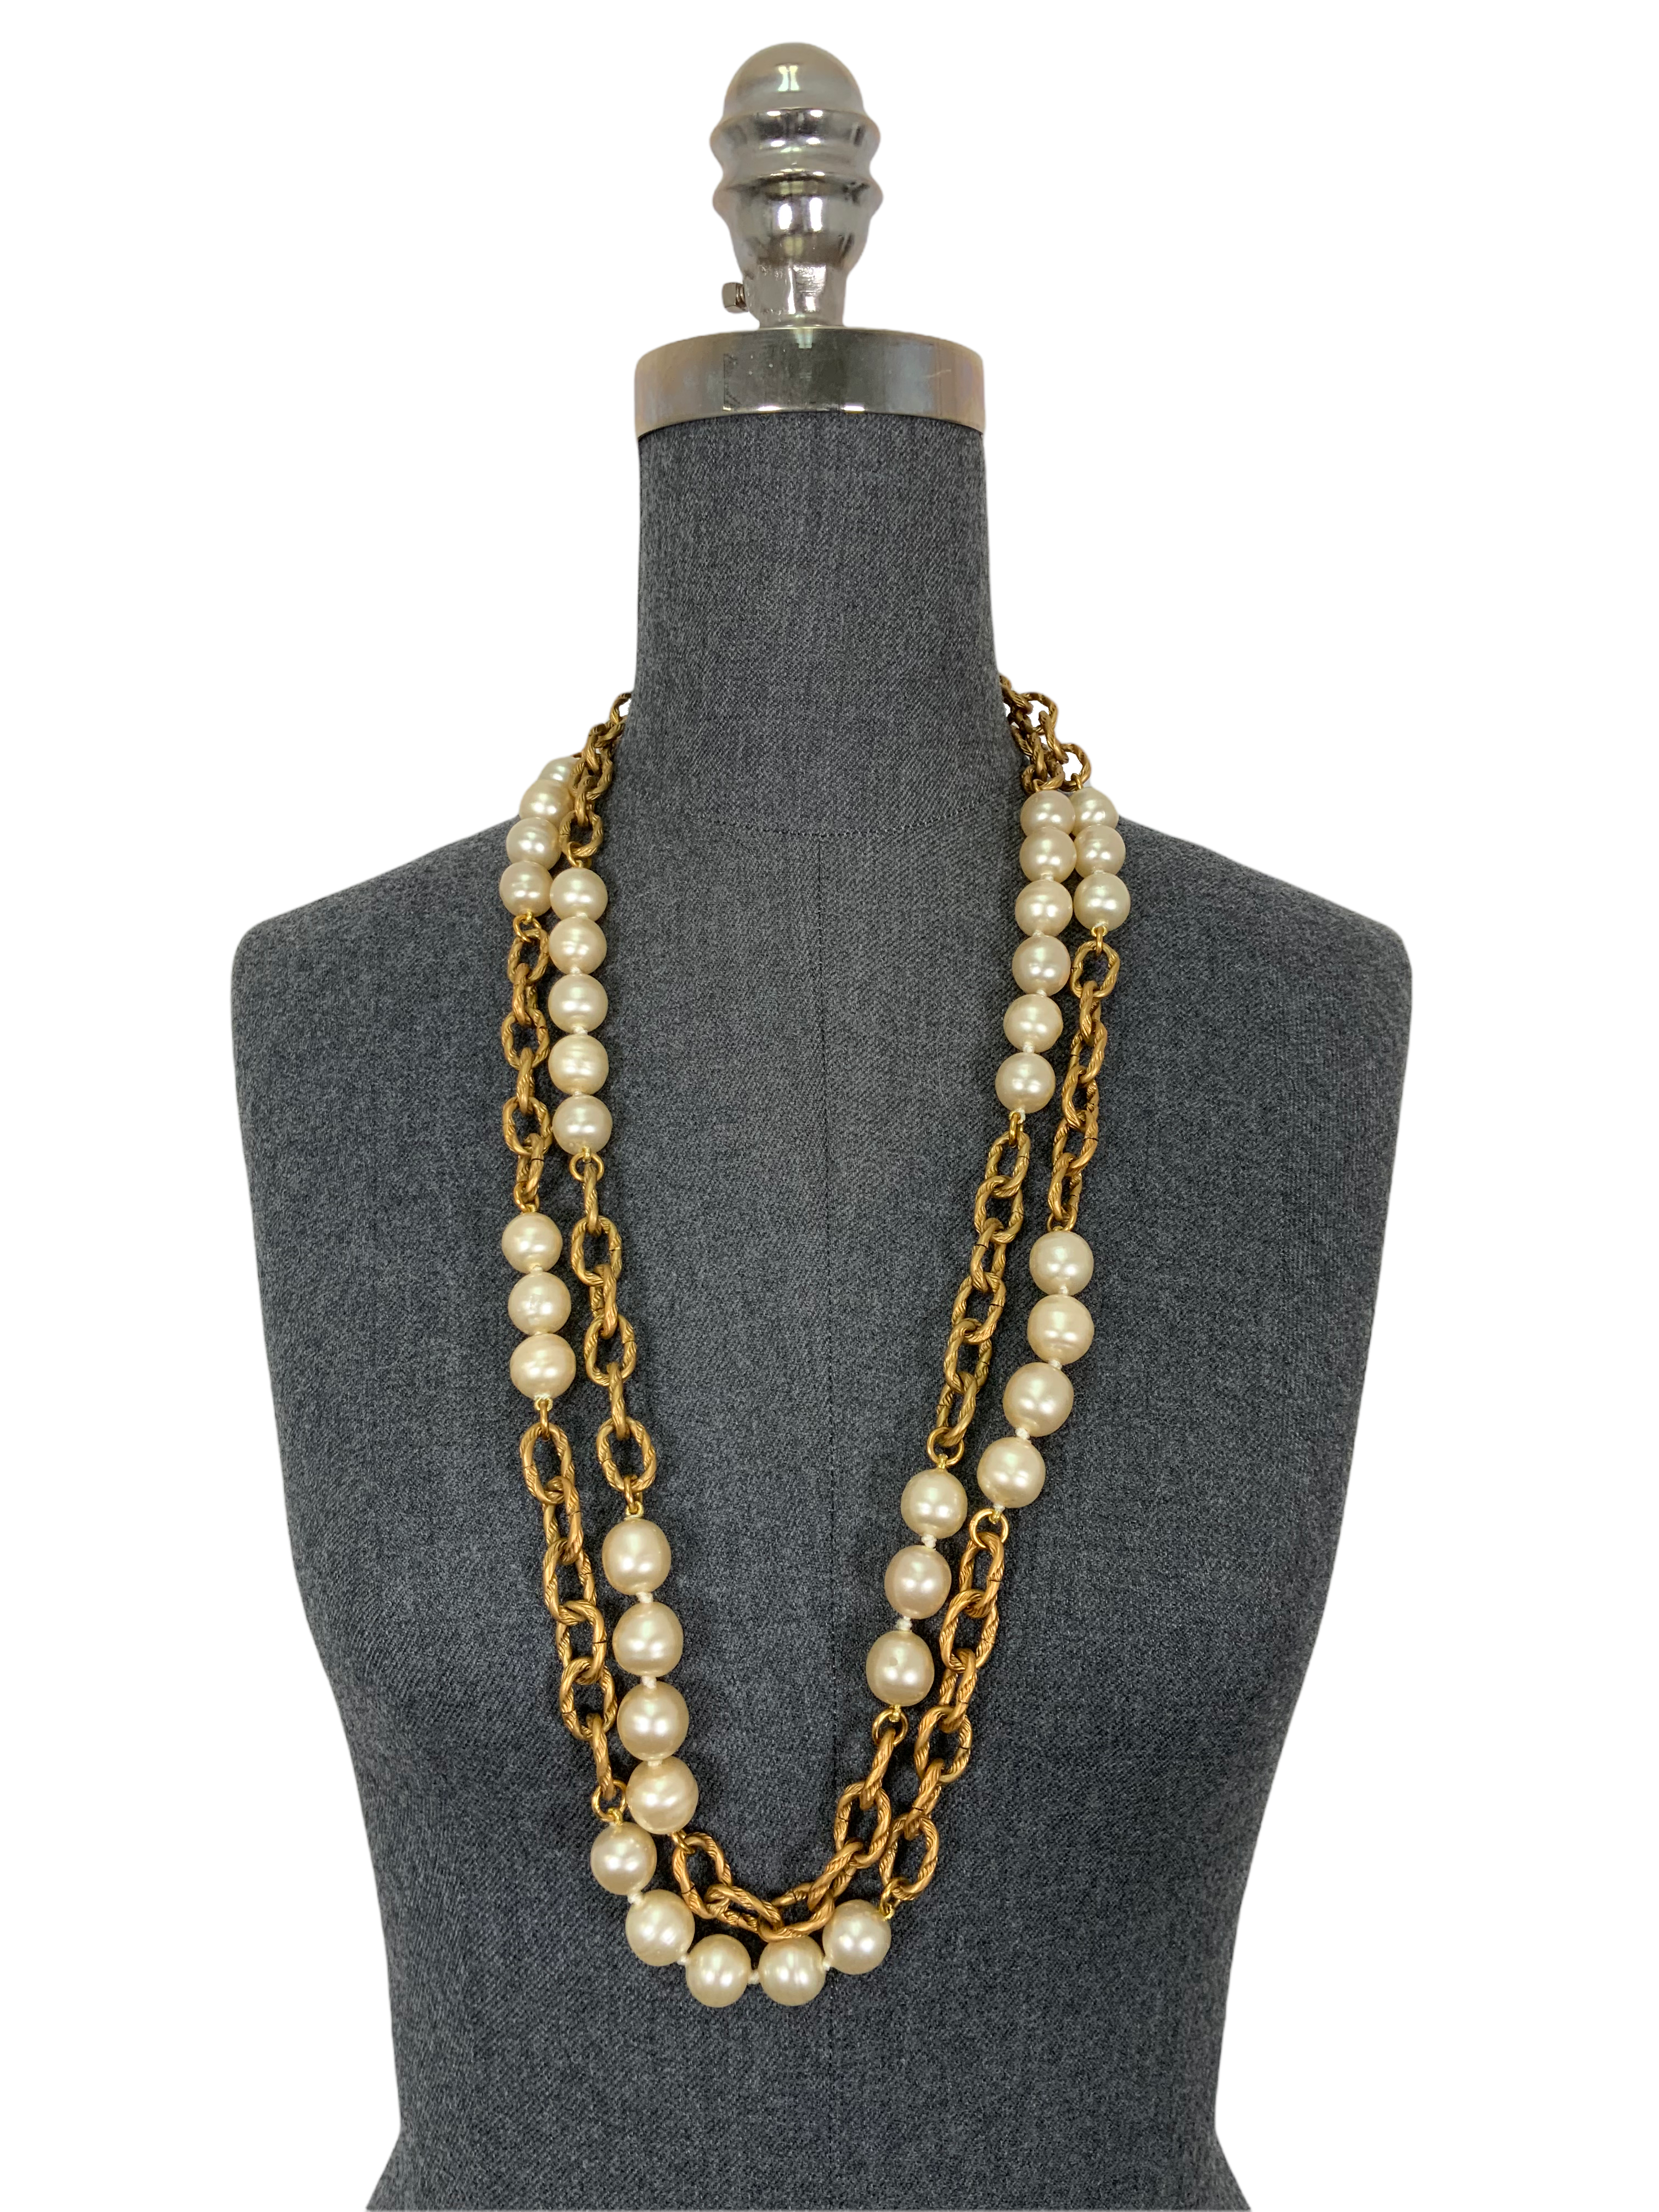 CHANEL Vintage Gold Tone Chain Link Choker Necklace 